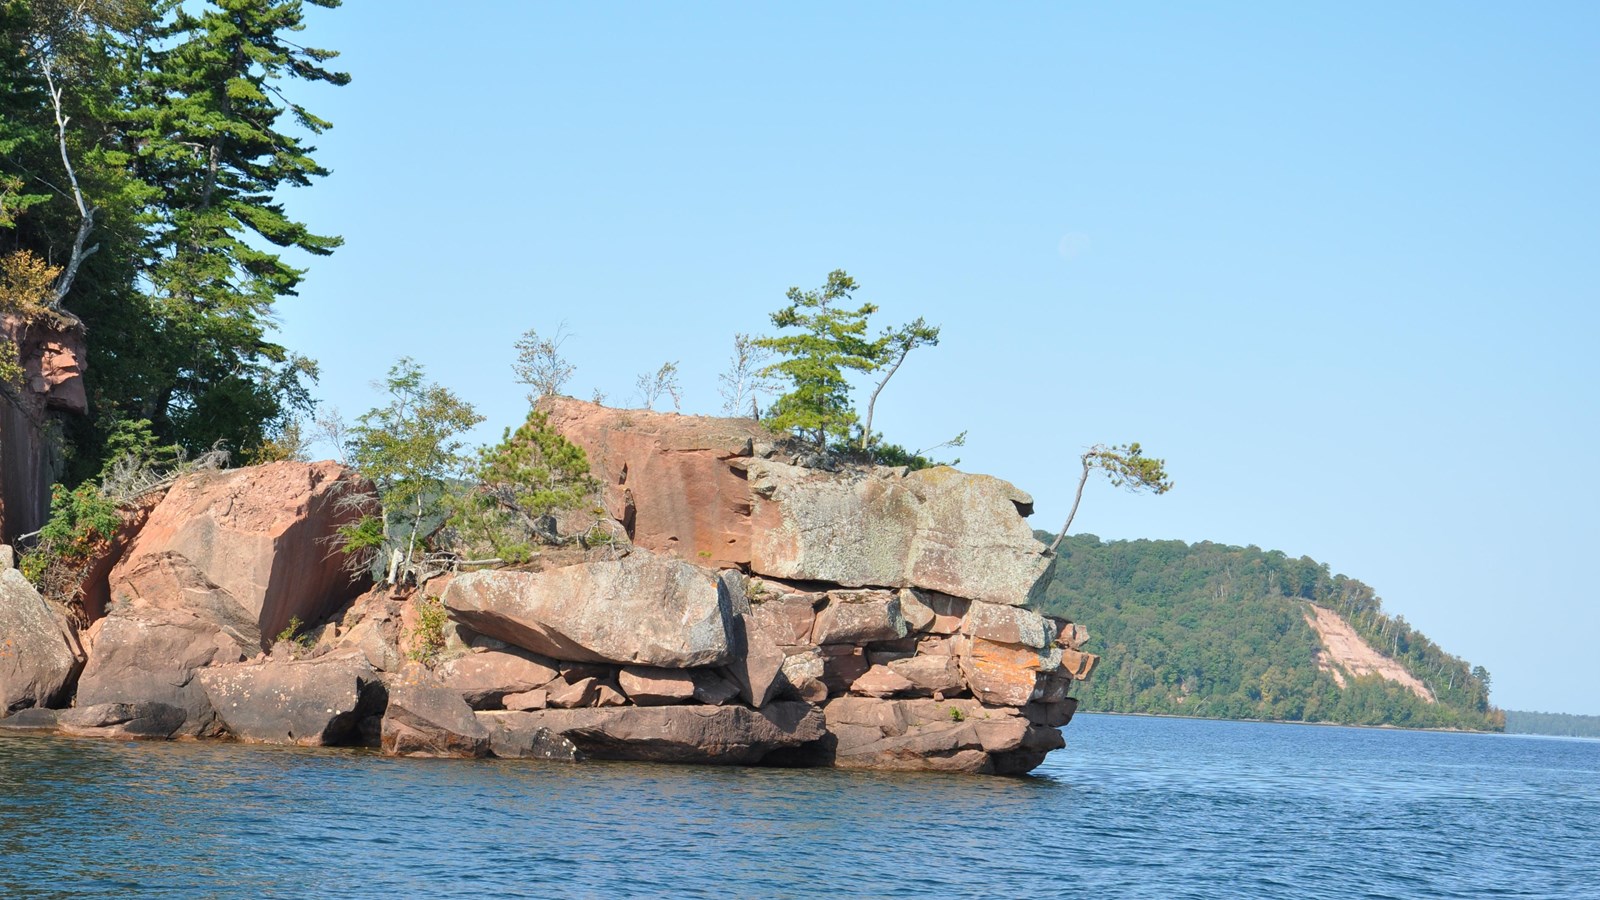 A rocky ledge sticking out of the water with tree covered cliffs in the background. 